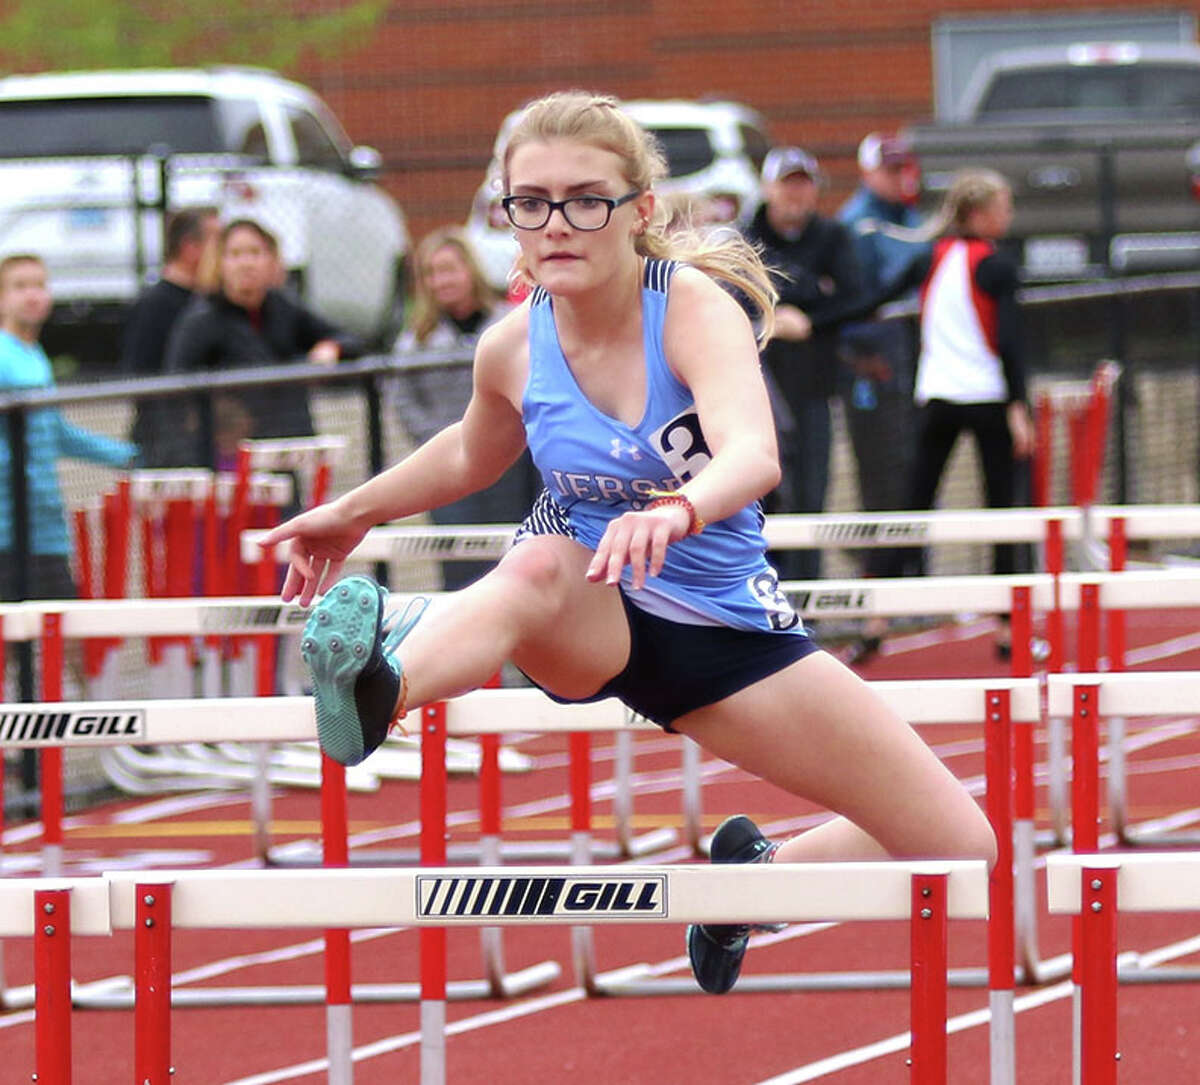 Jersey freshman Coree Yates clears a hurdle in a 100-meter hurdles heat  Thursday at the MVC girls track meet at Waterloo.